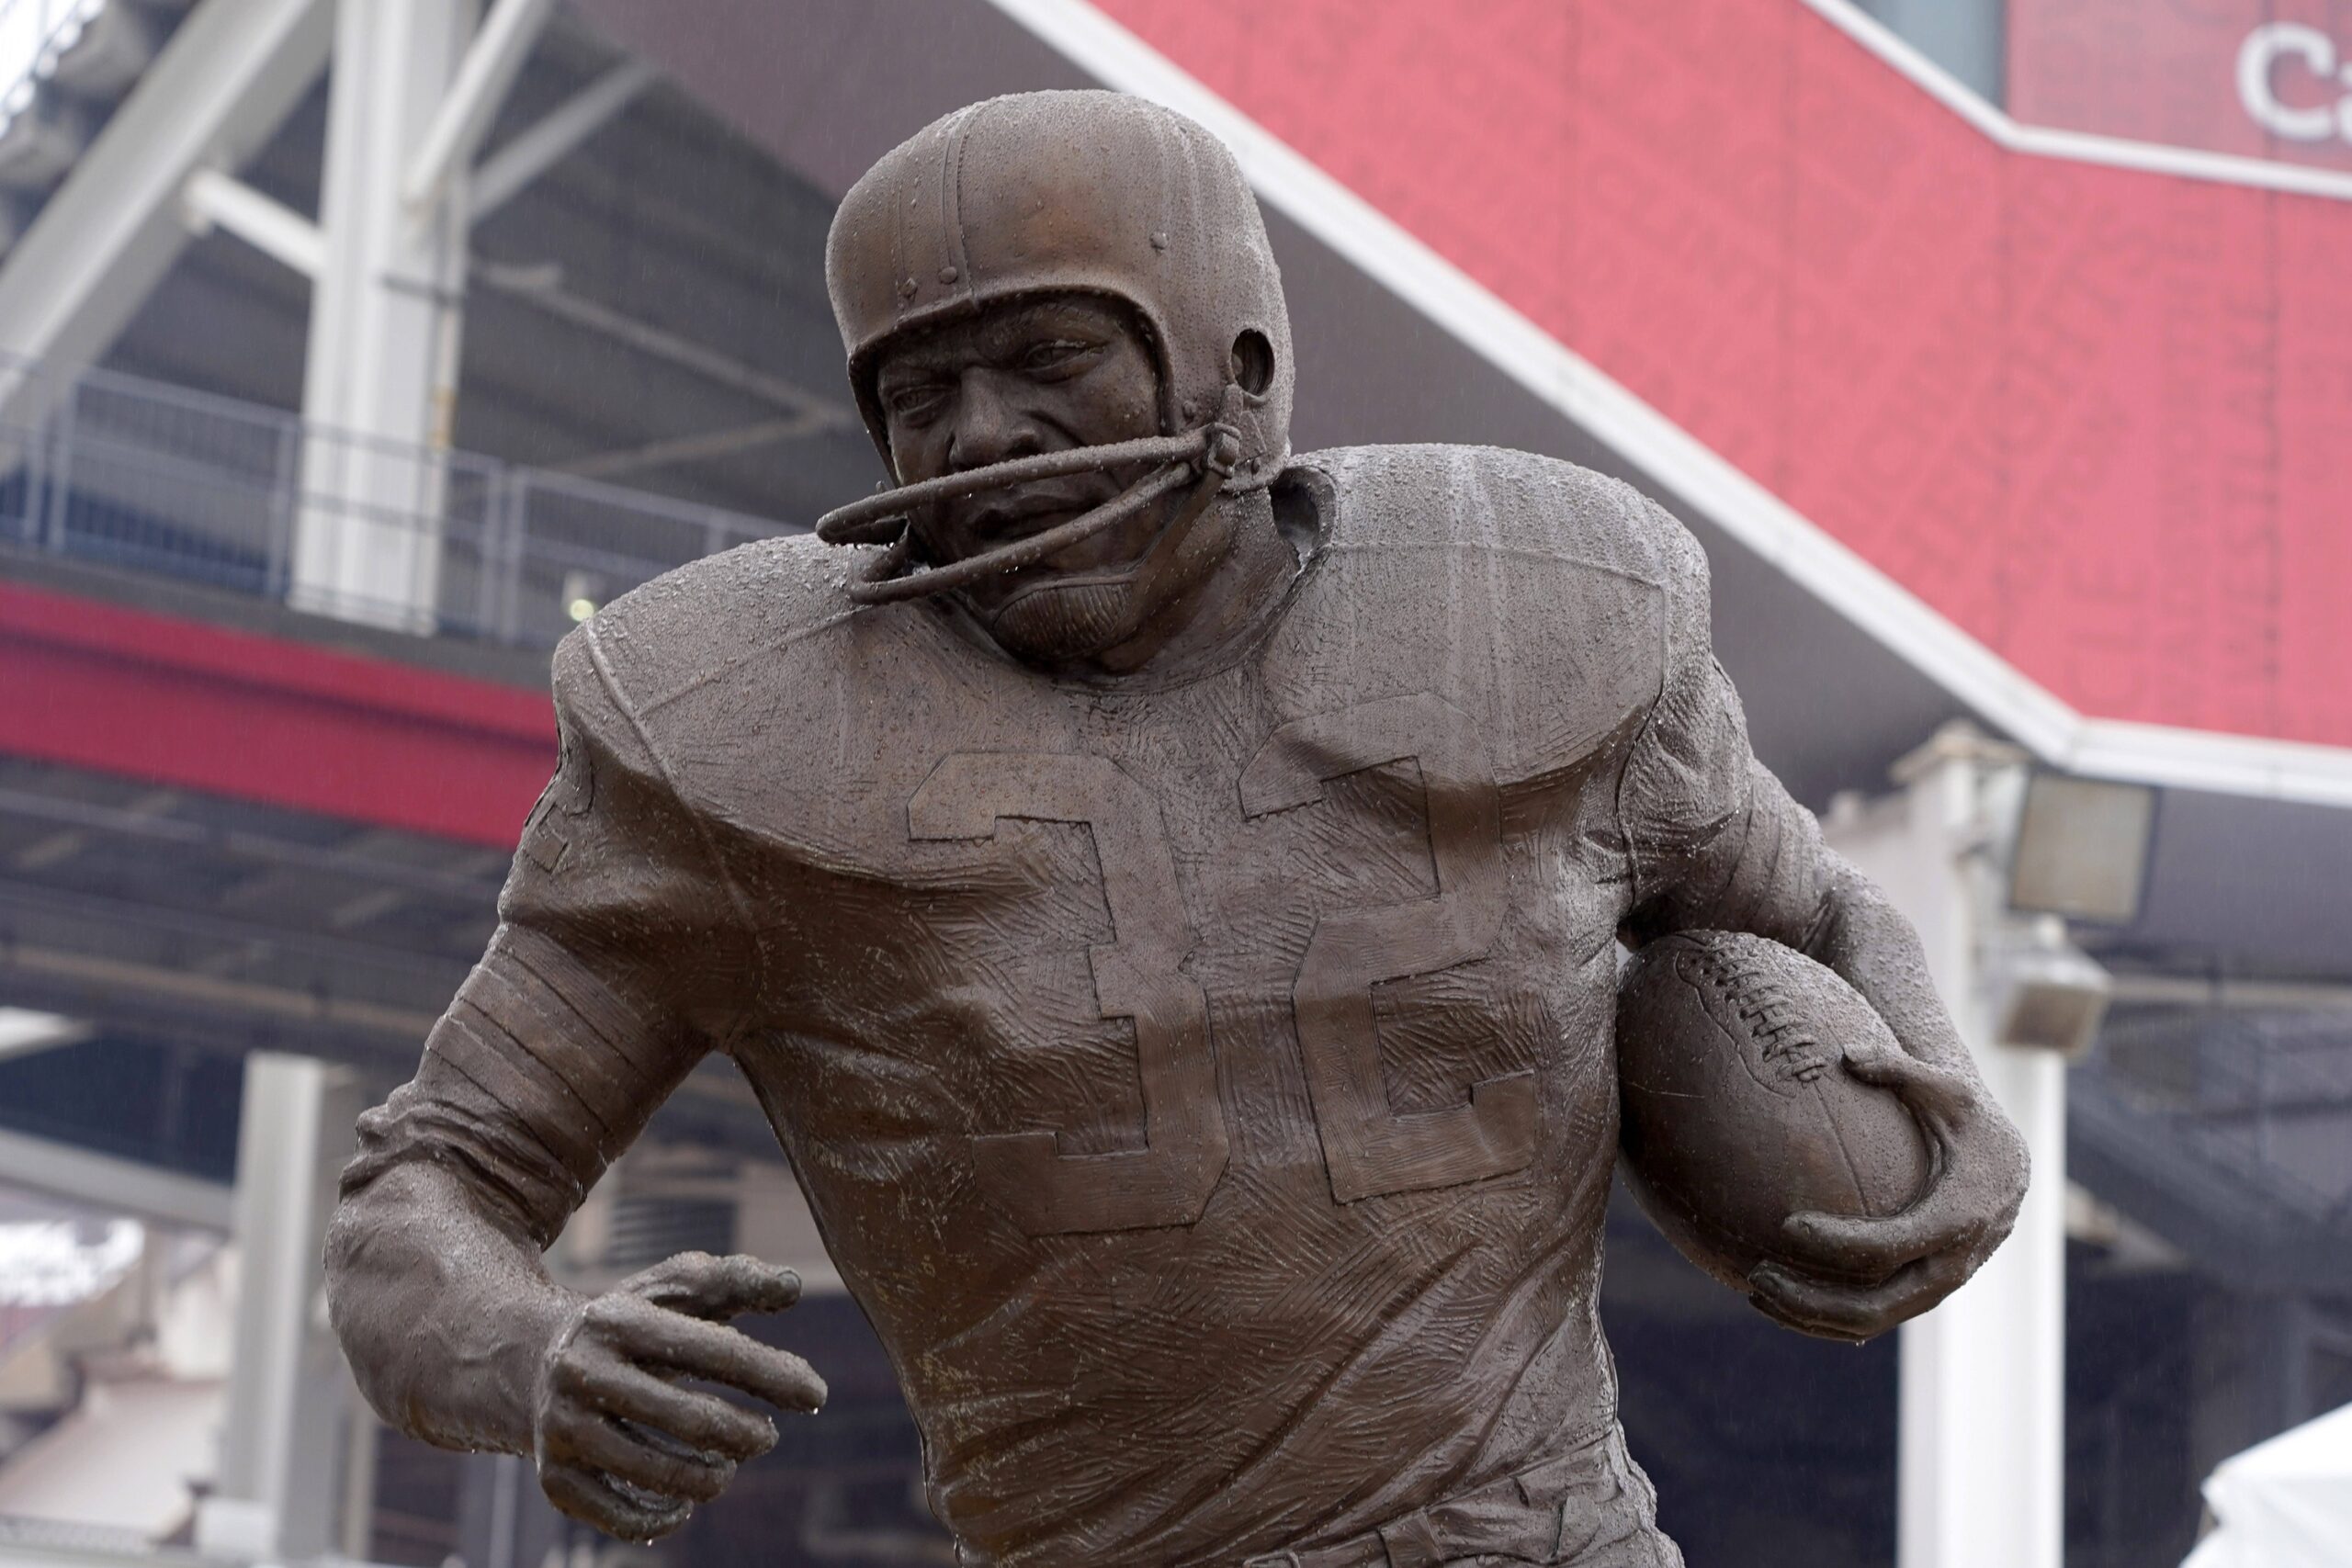 A statue of former Cleveland Browns running back Jim Brown at First Energy Stadium.